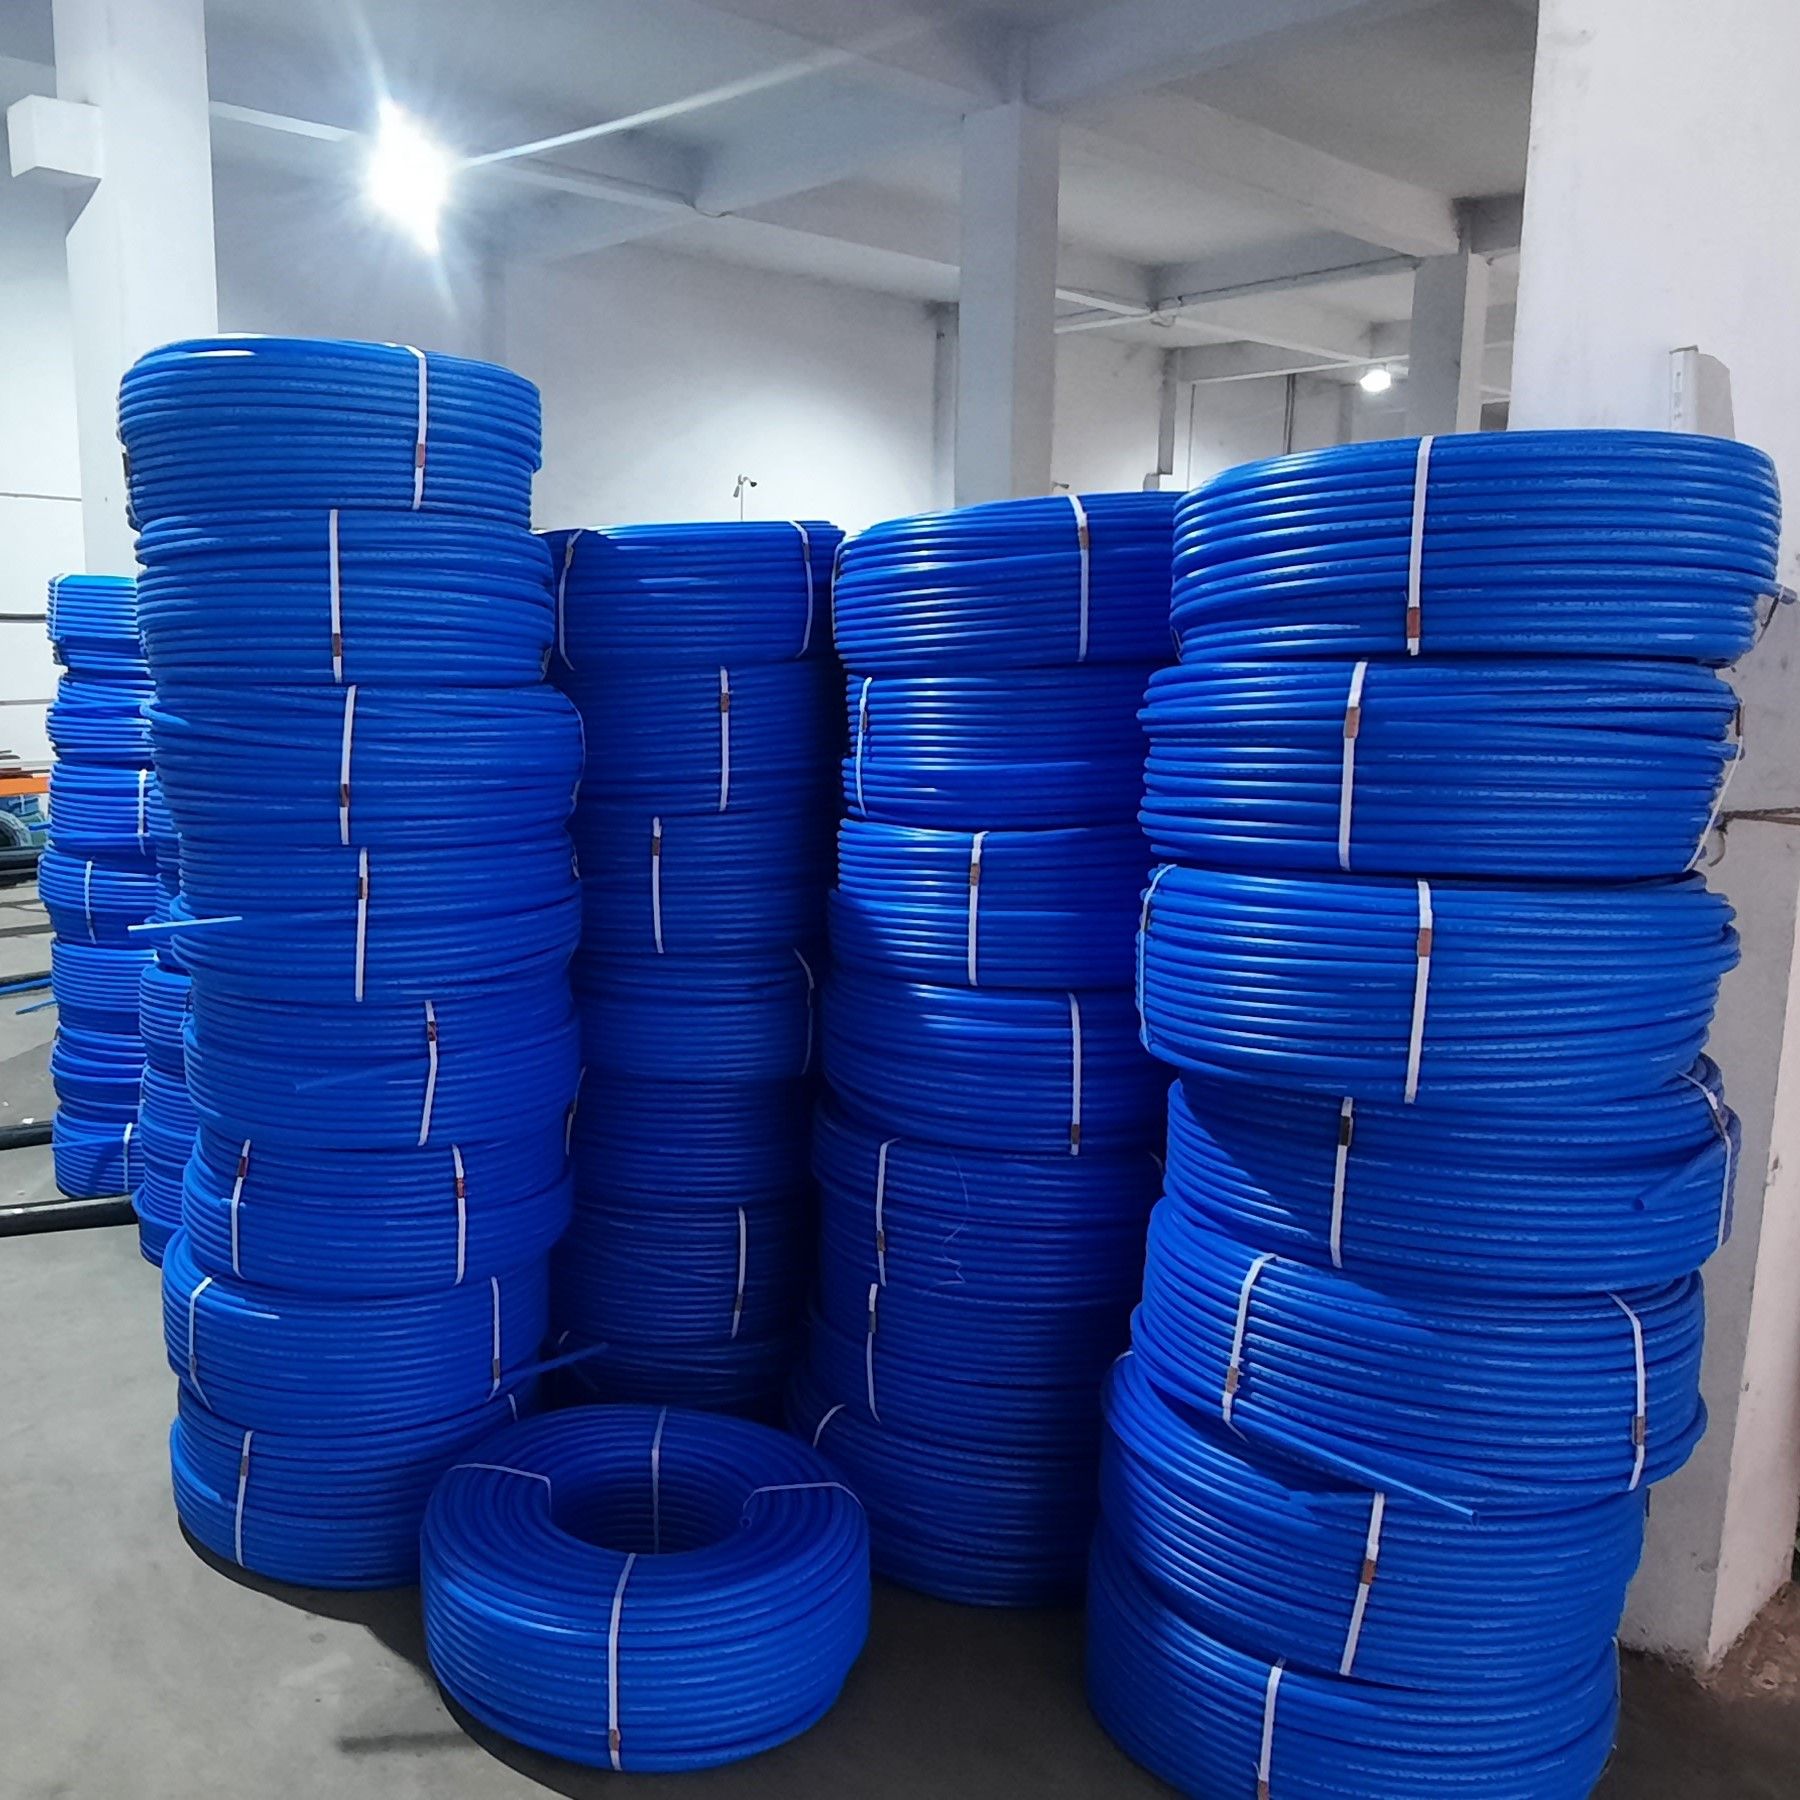 mdpe pipes manufacturer - MDPE PIPES